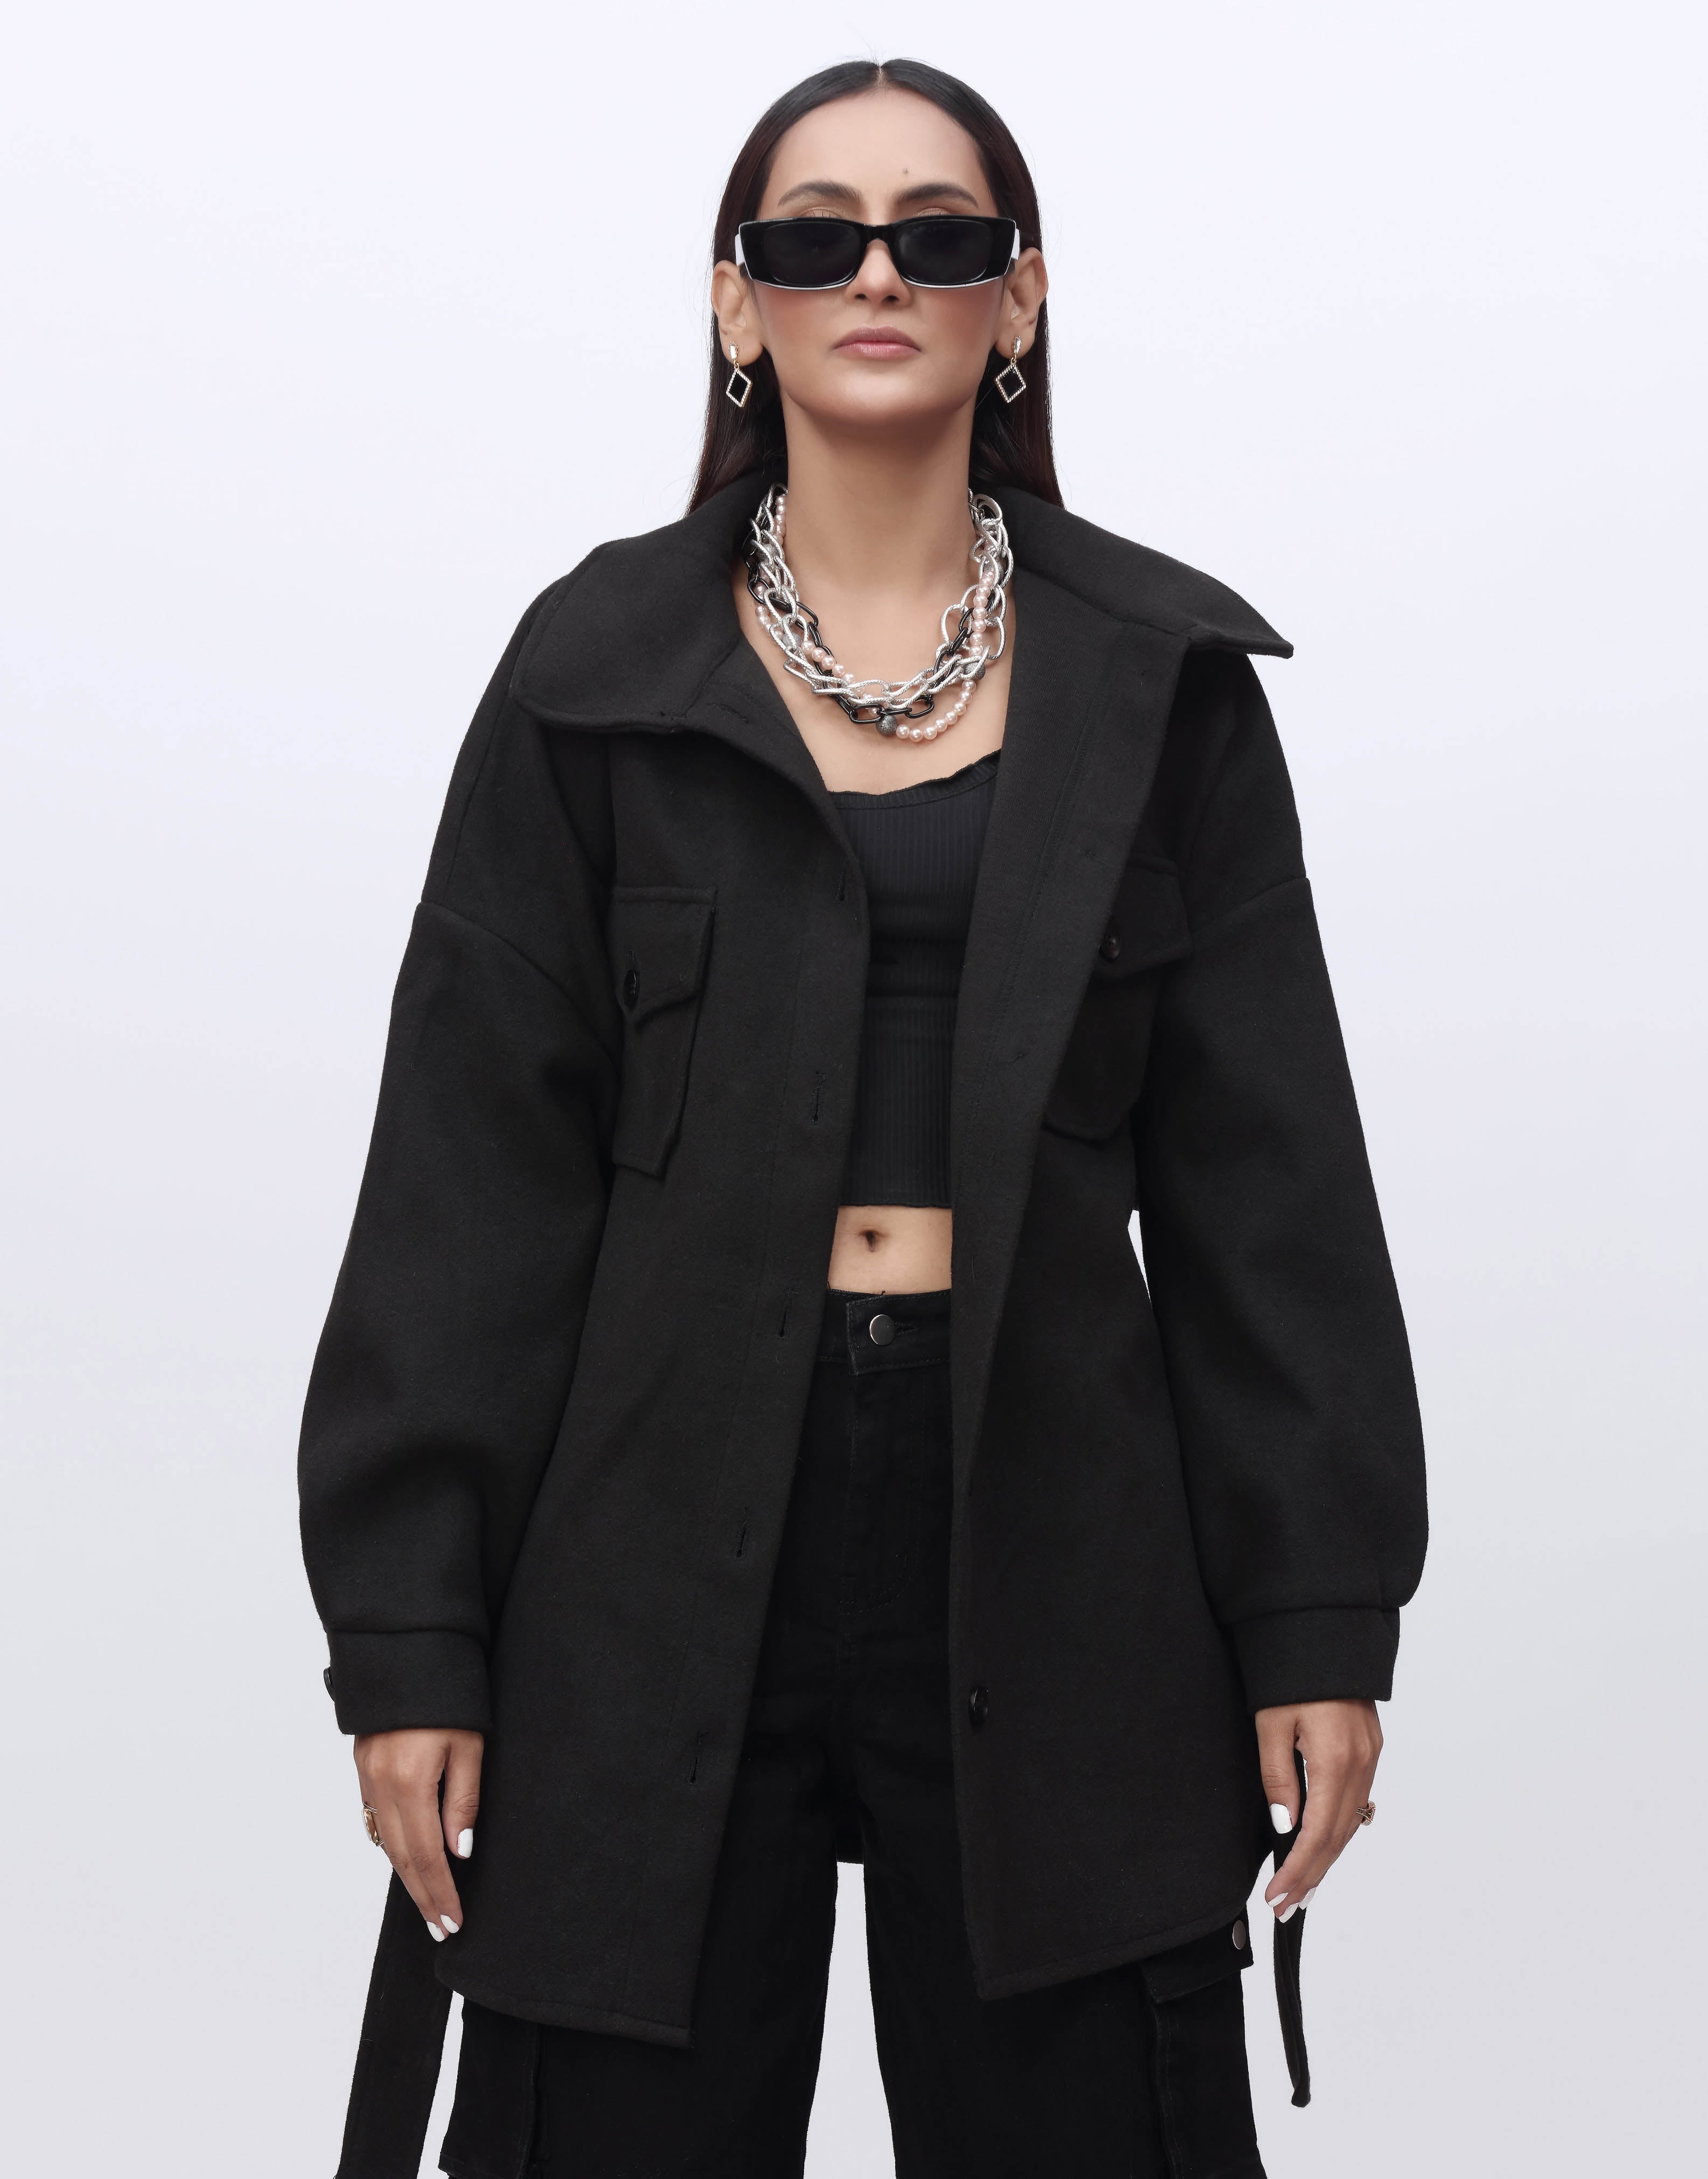 Trench Coat-Black (Without Belt)